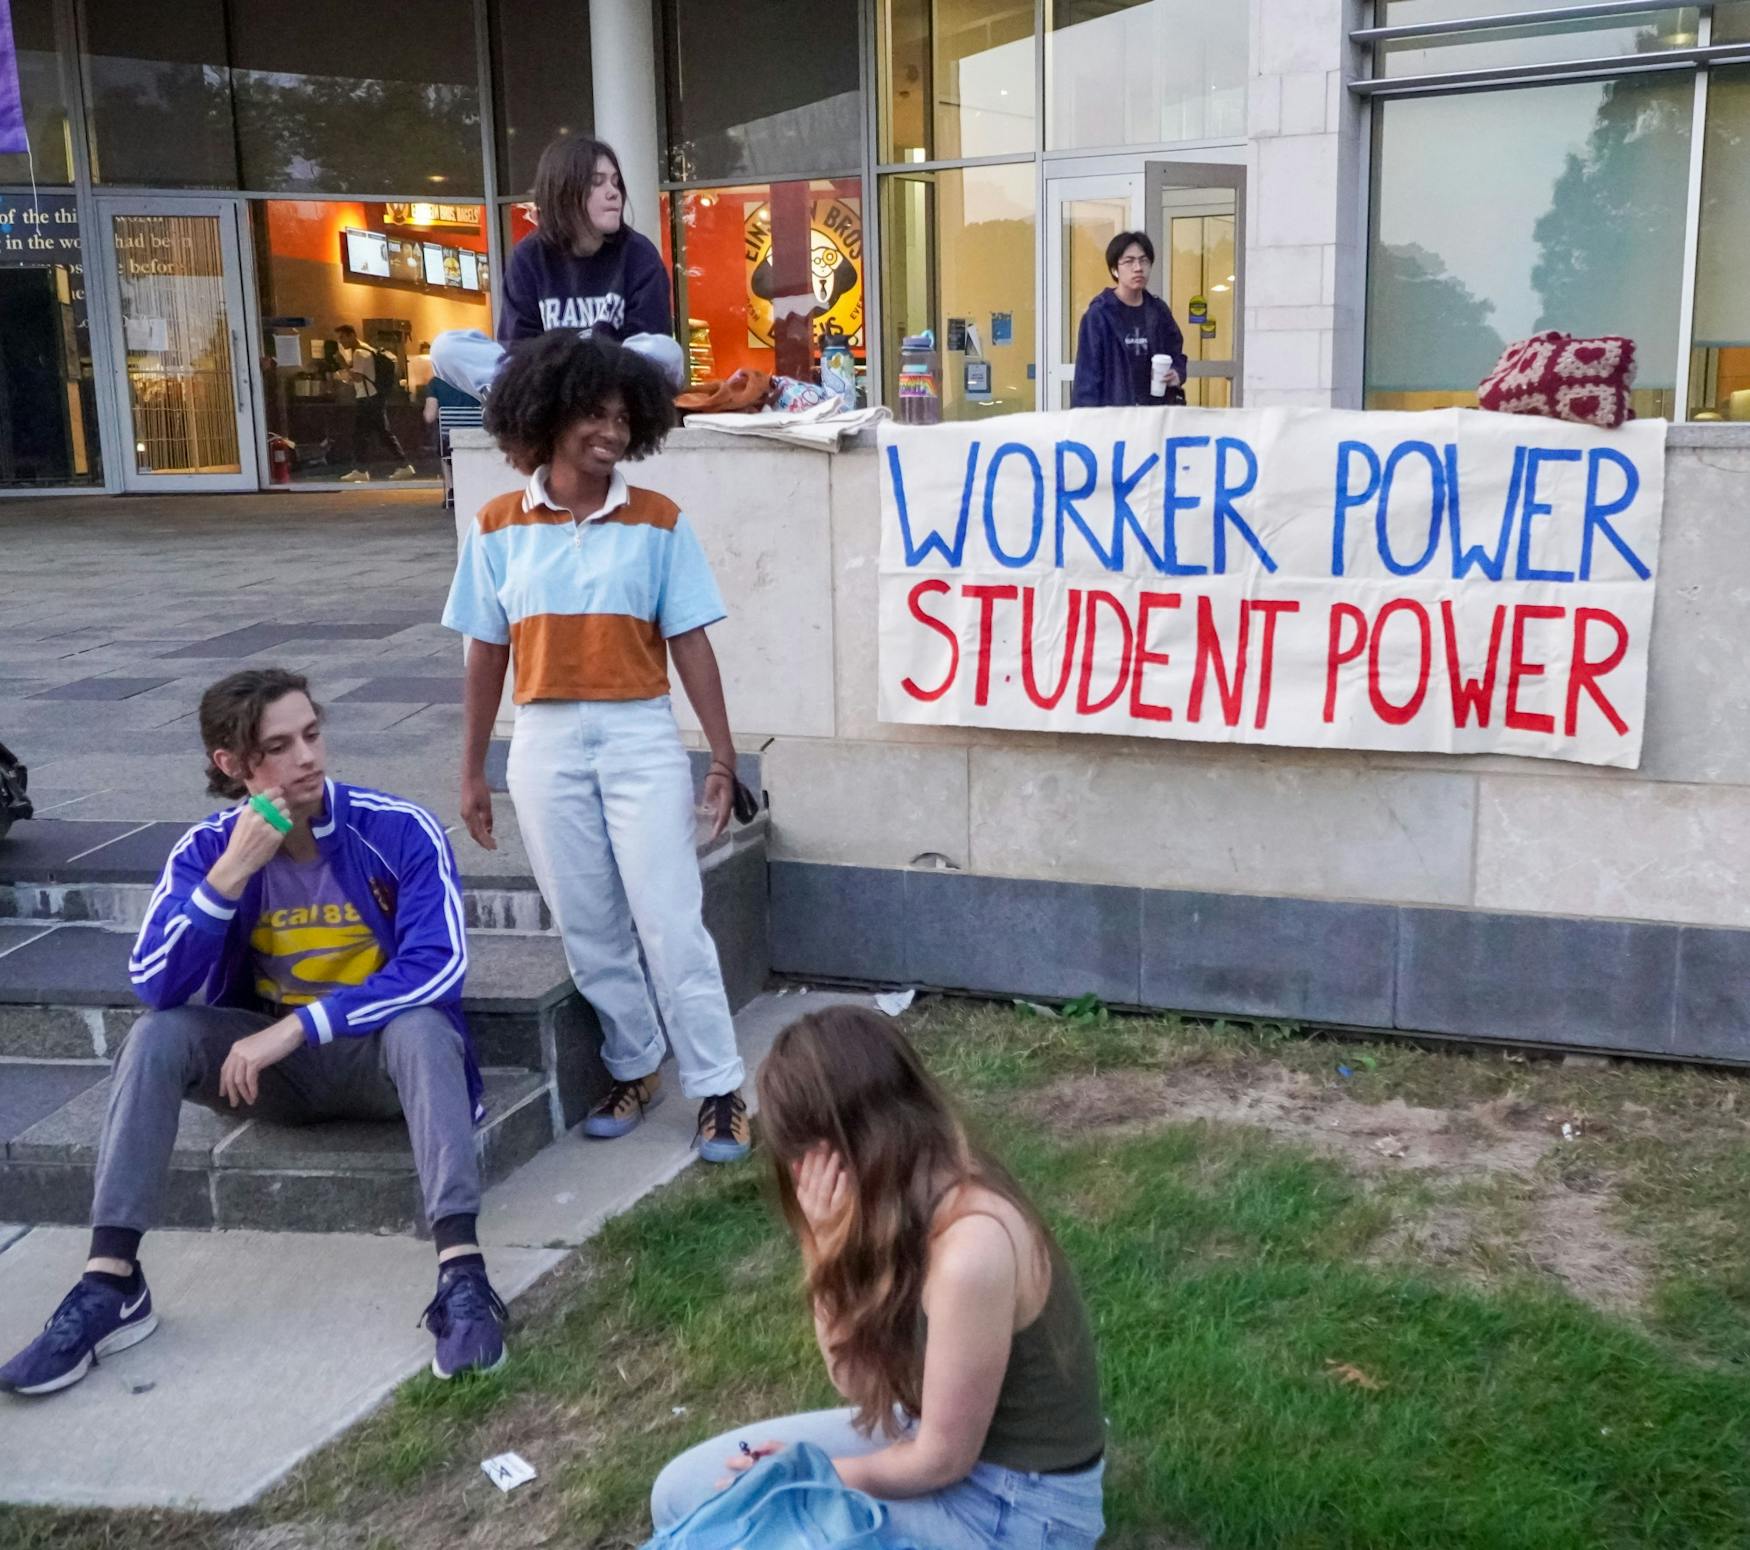 PROTEST: Students and dining hall workers gathered together to voice concerns over the treatment of dining staff.